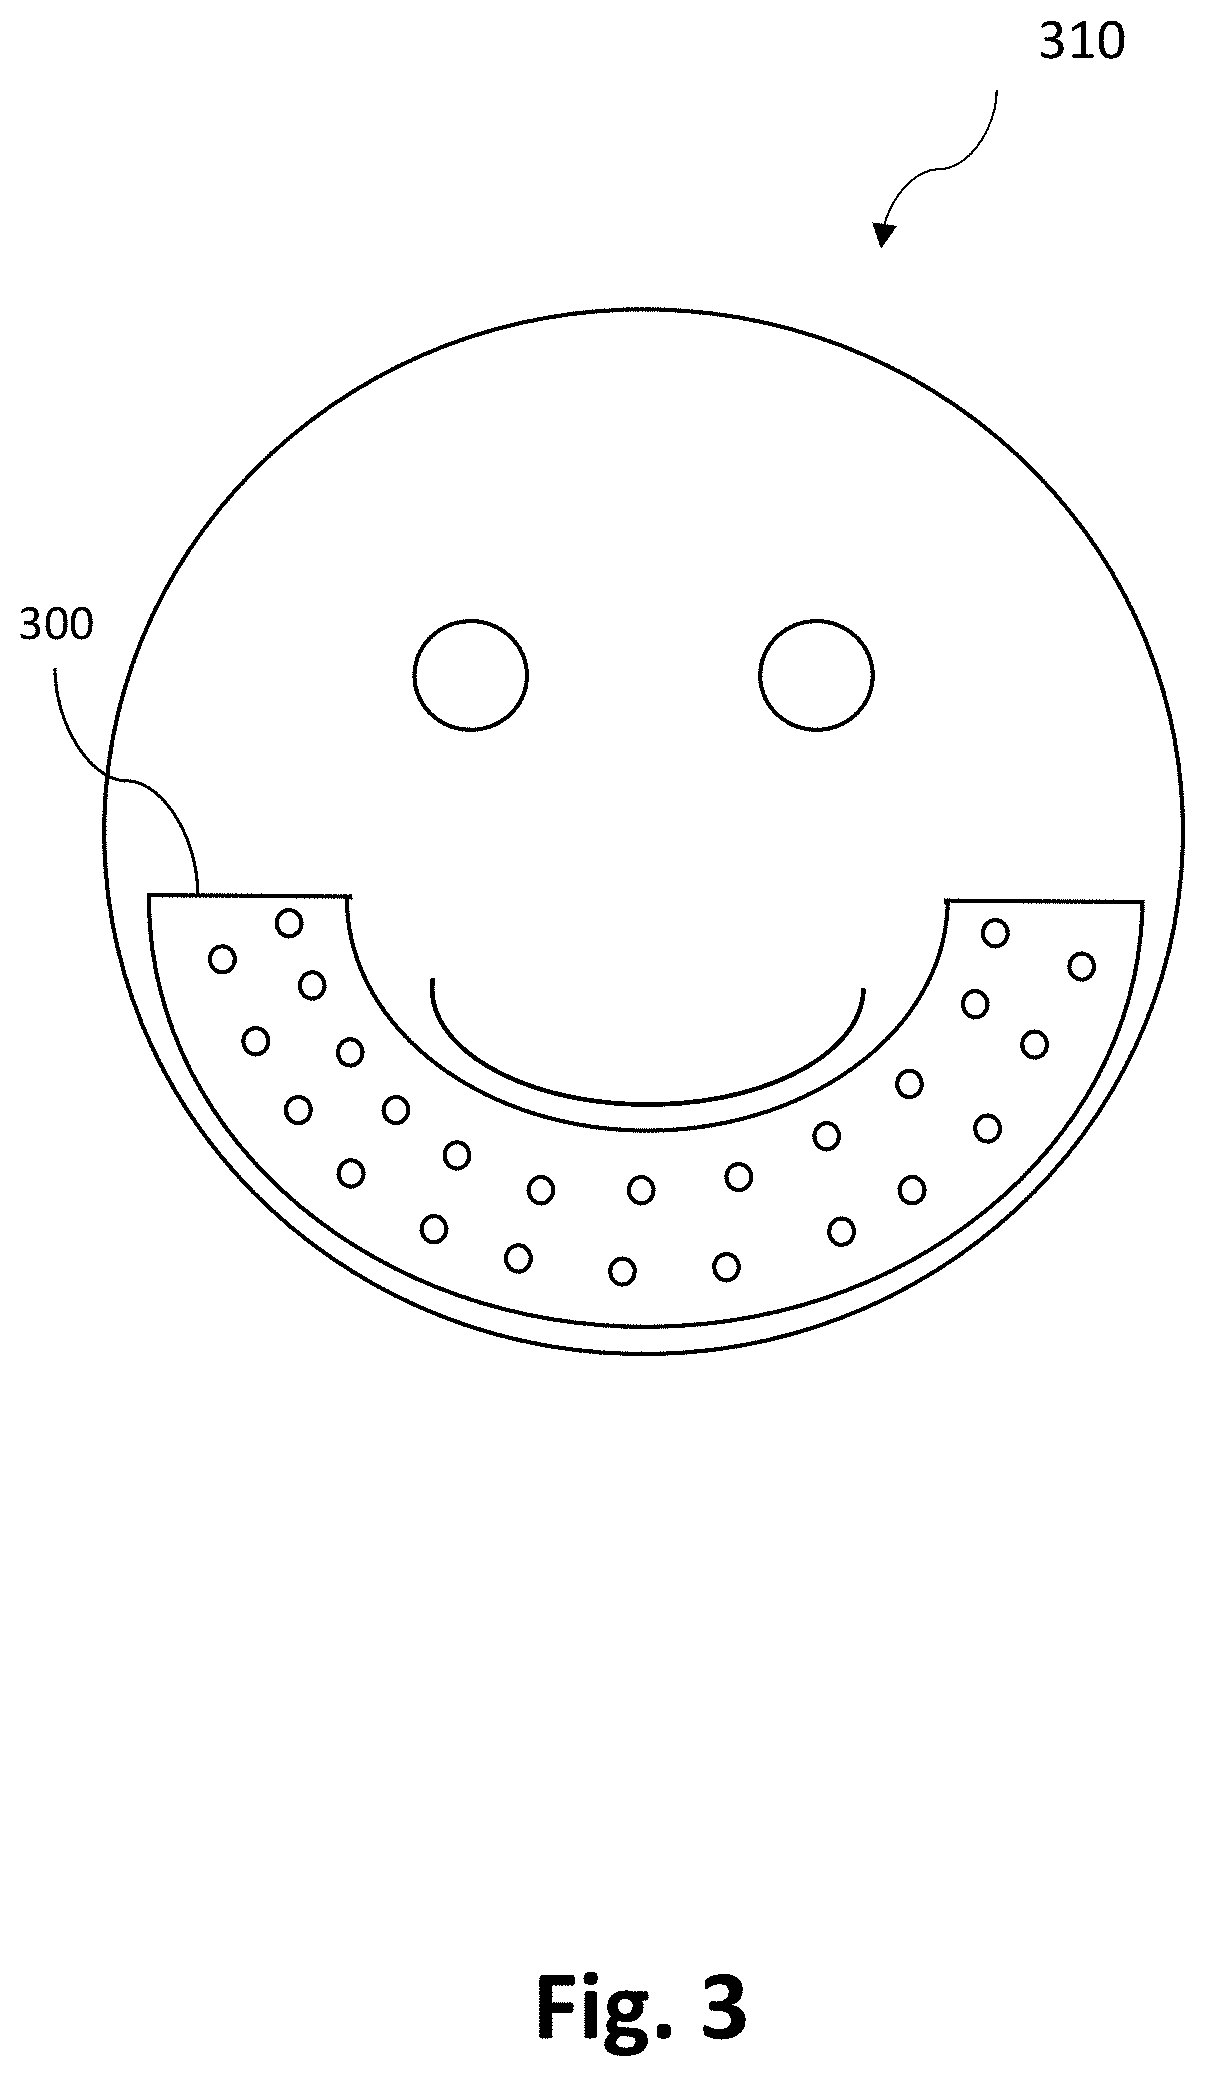 Electrical stimulation system for facial expressions and a method of use thereof